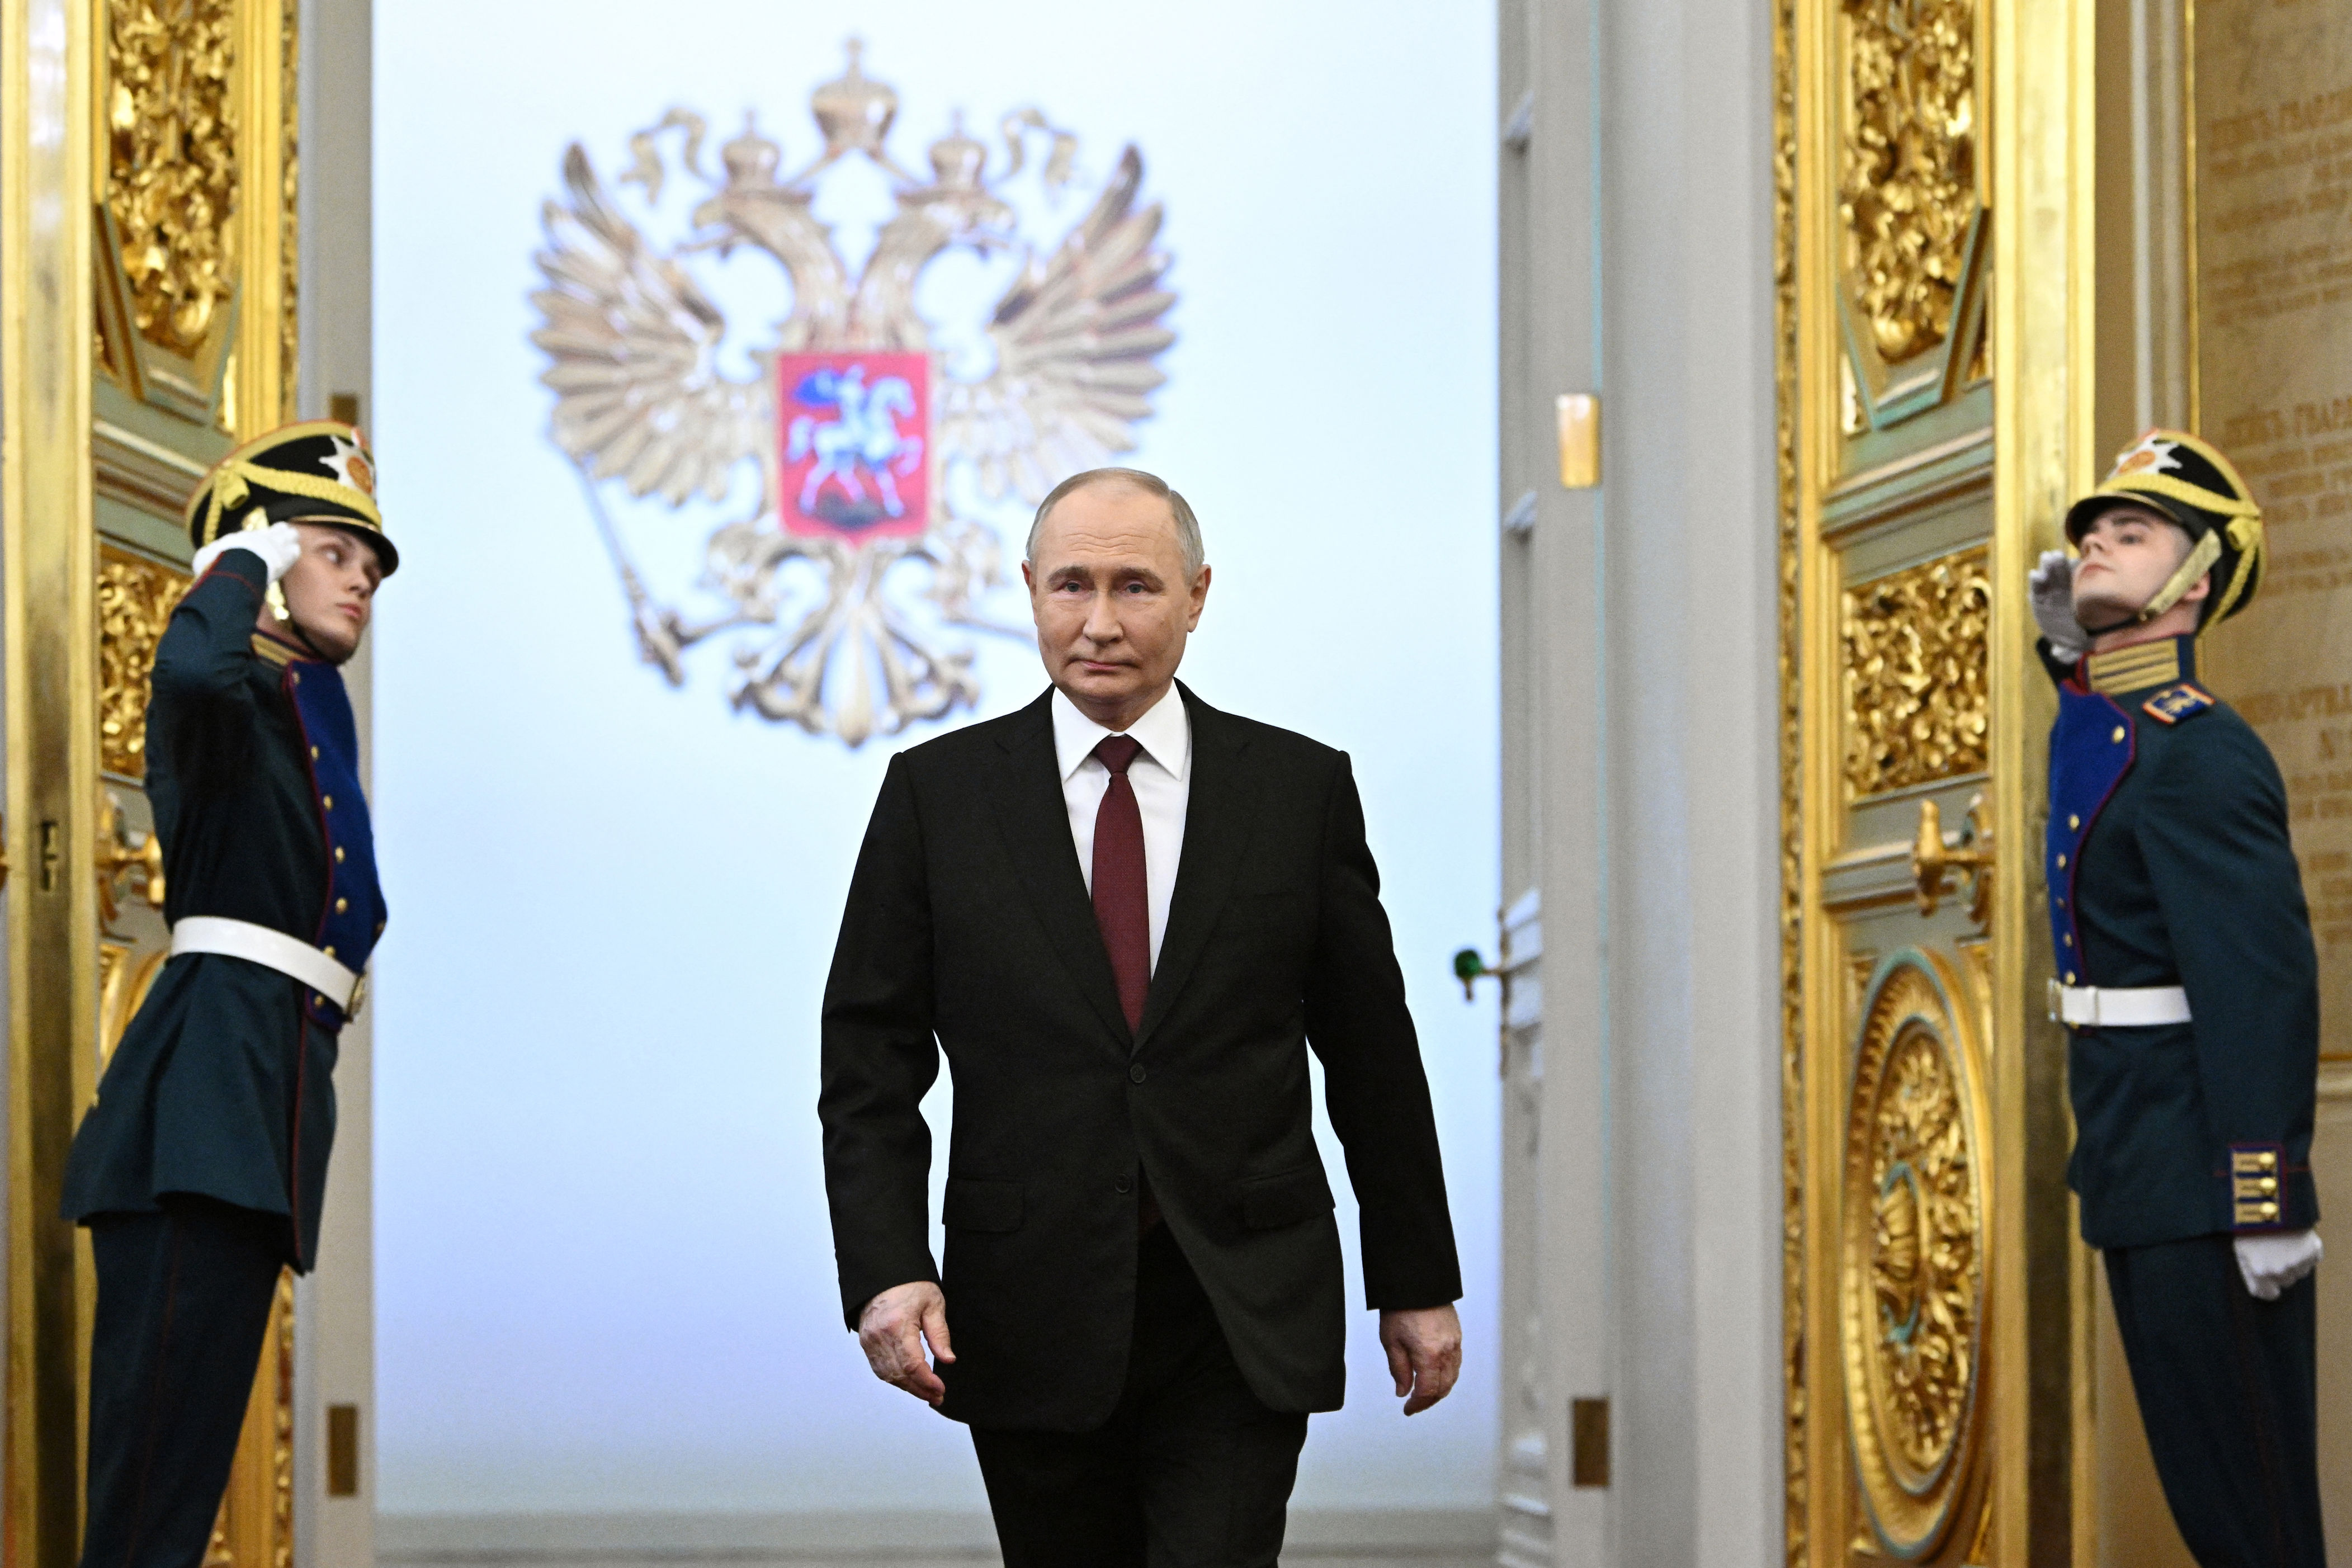 triumphal putin is inaugurated for fifth term as russian president